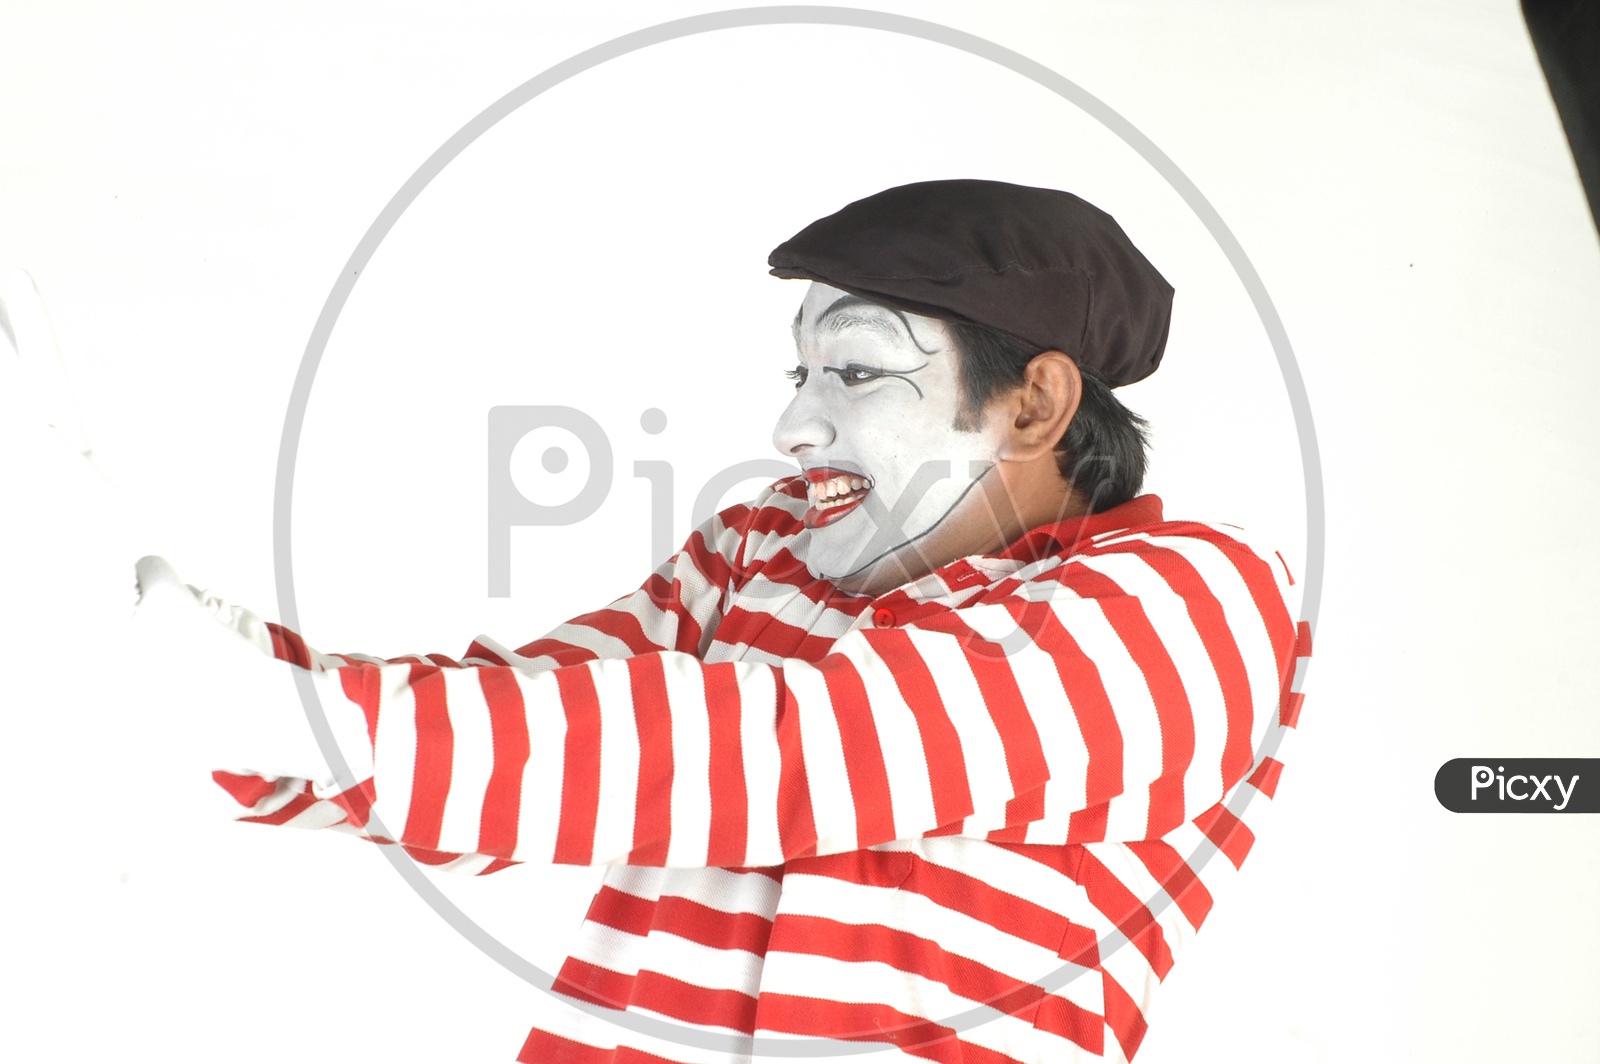 Male Mime Artist With Expressions